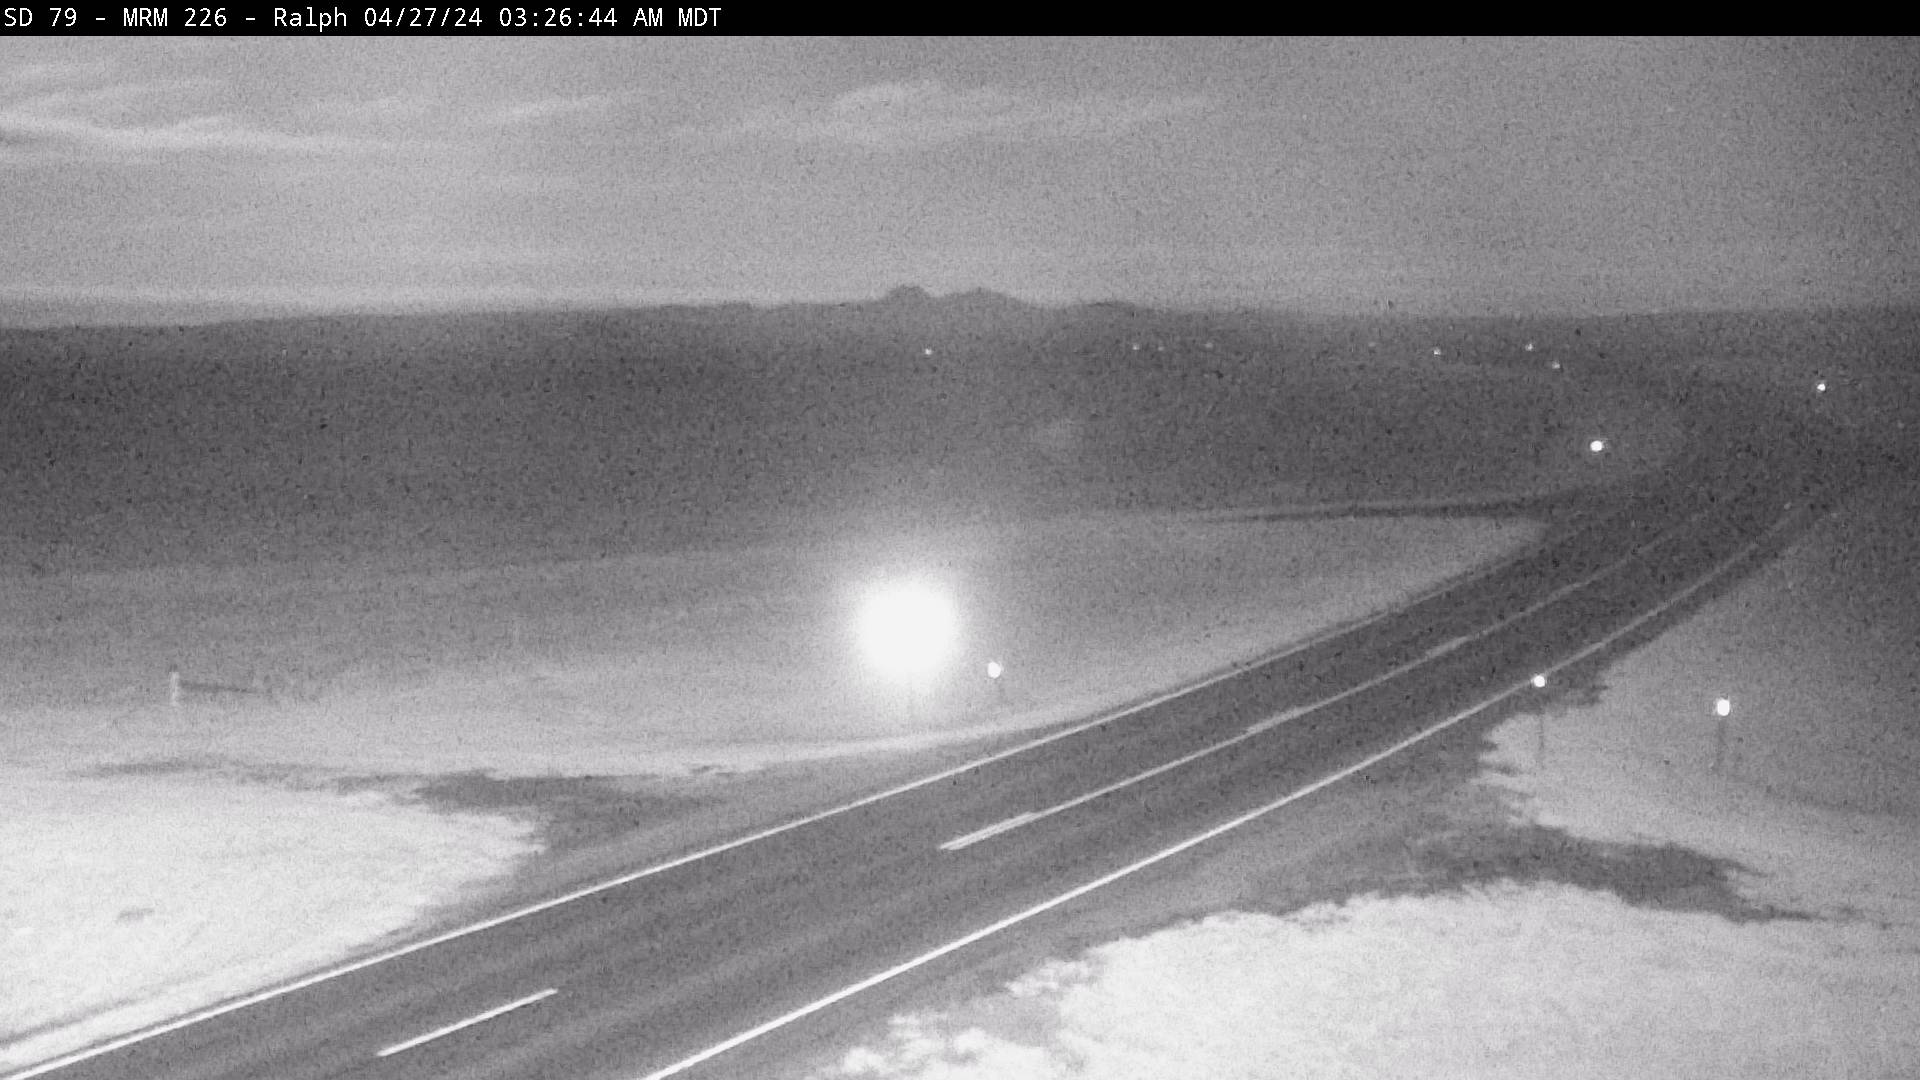 north of town along SD-79 @ MP 226 - South Traffic Camera